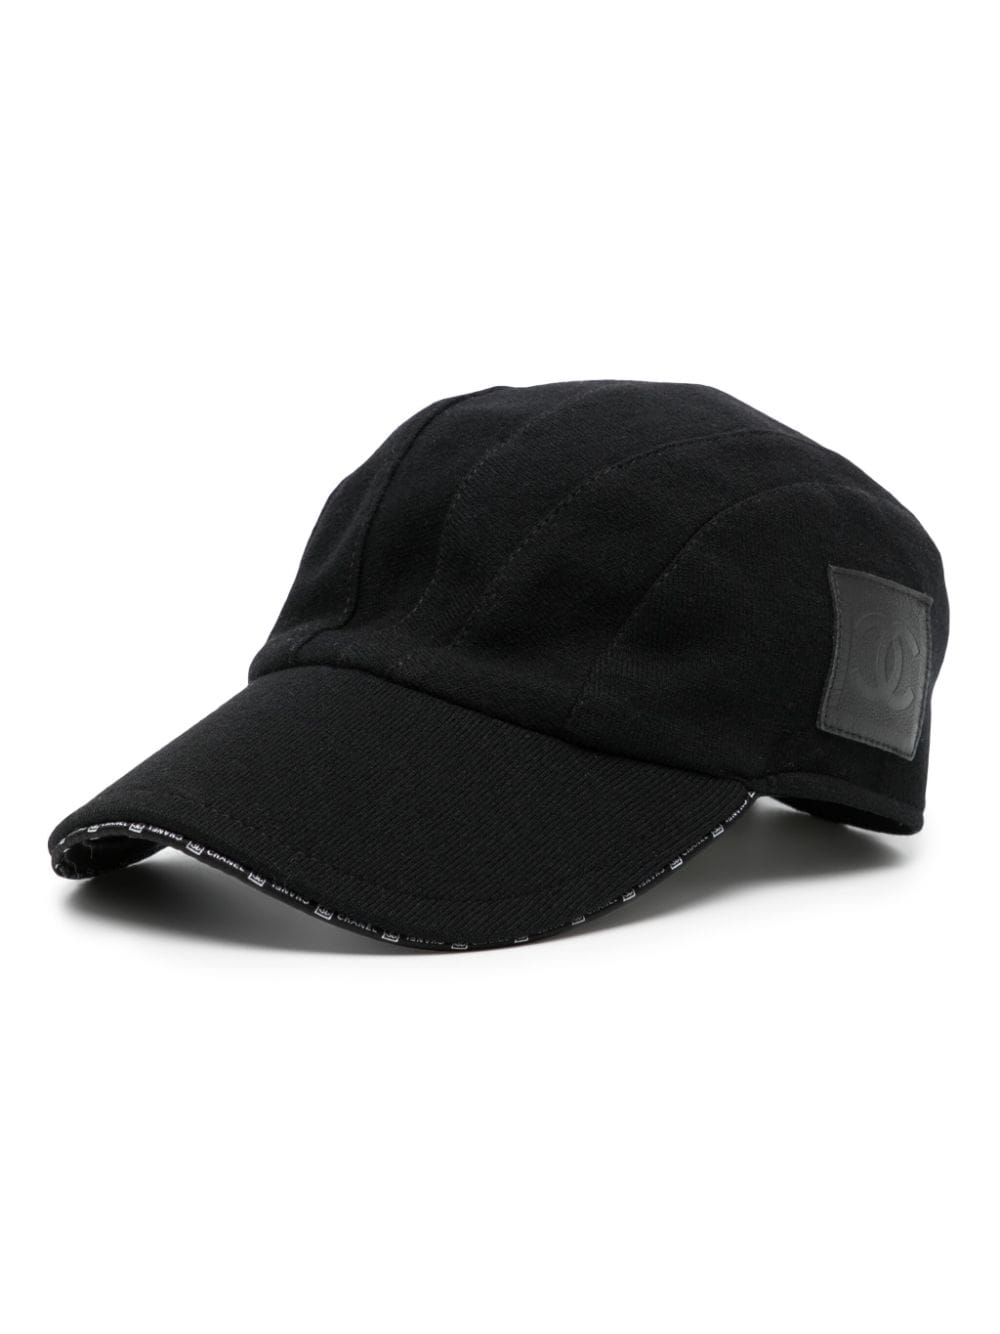 Pre-owned Chanel 2000s Cc Sports Line Cap In Black